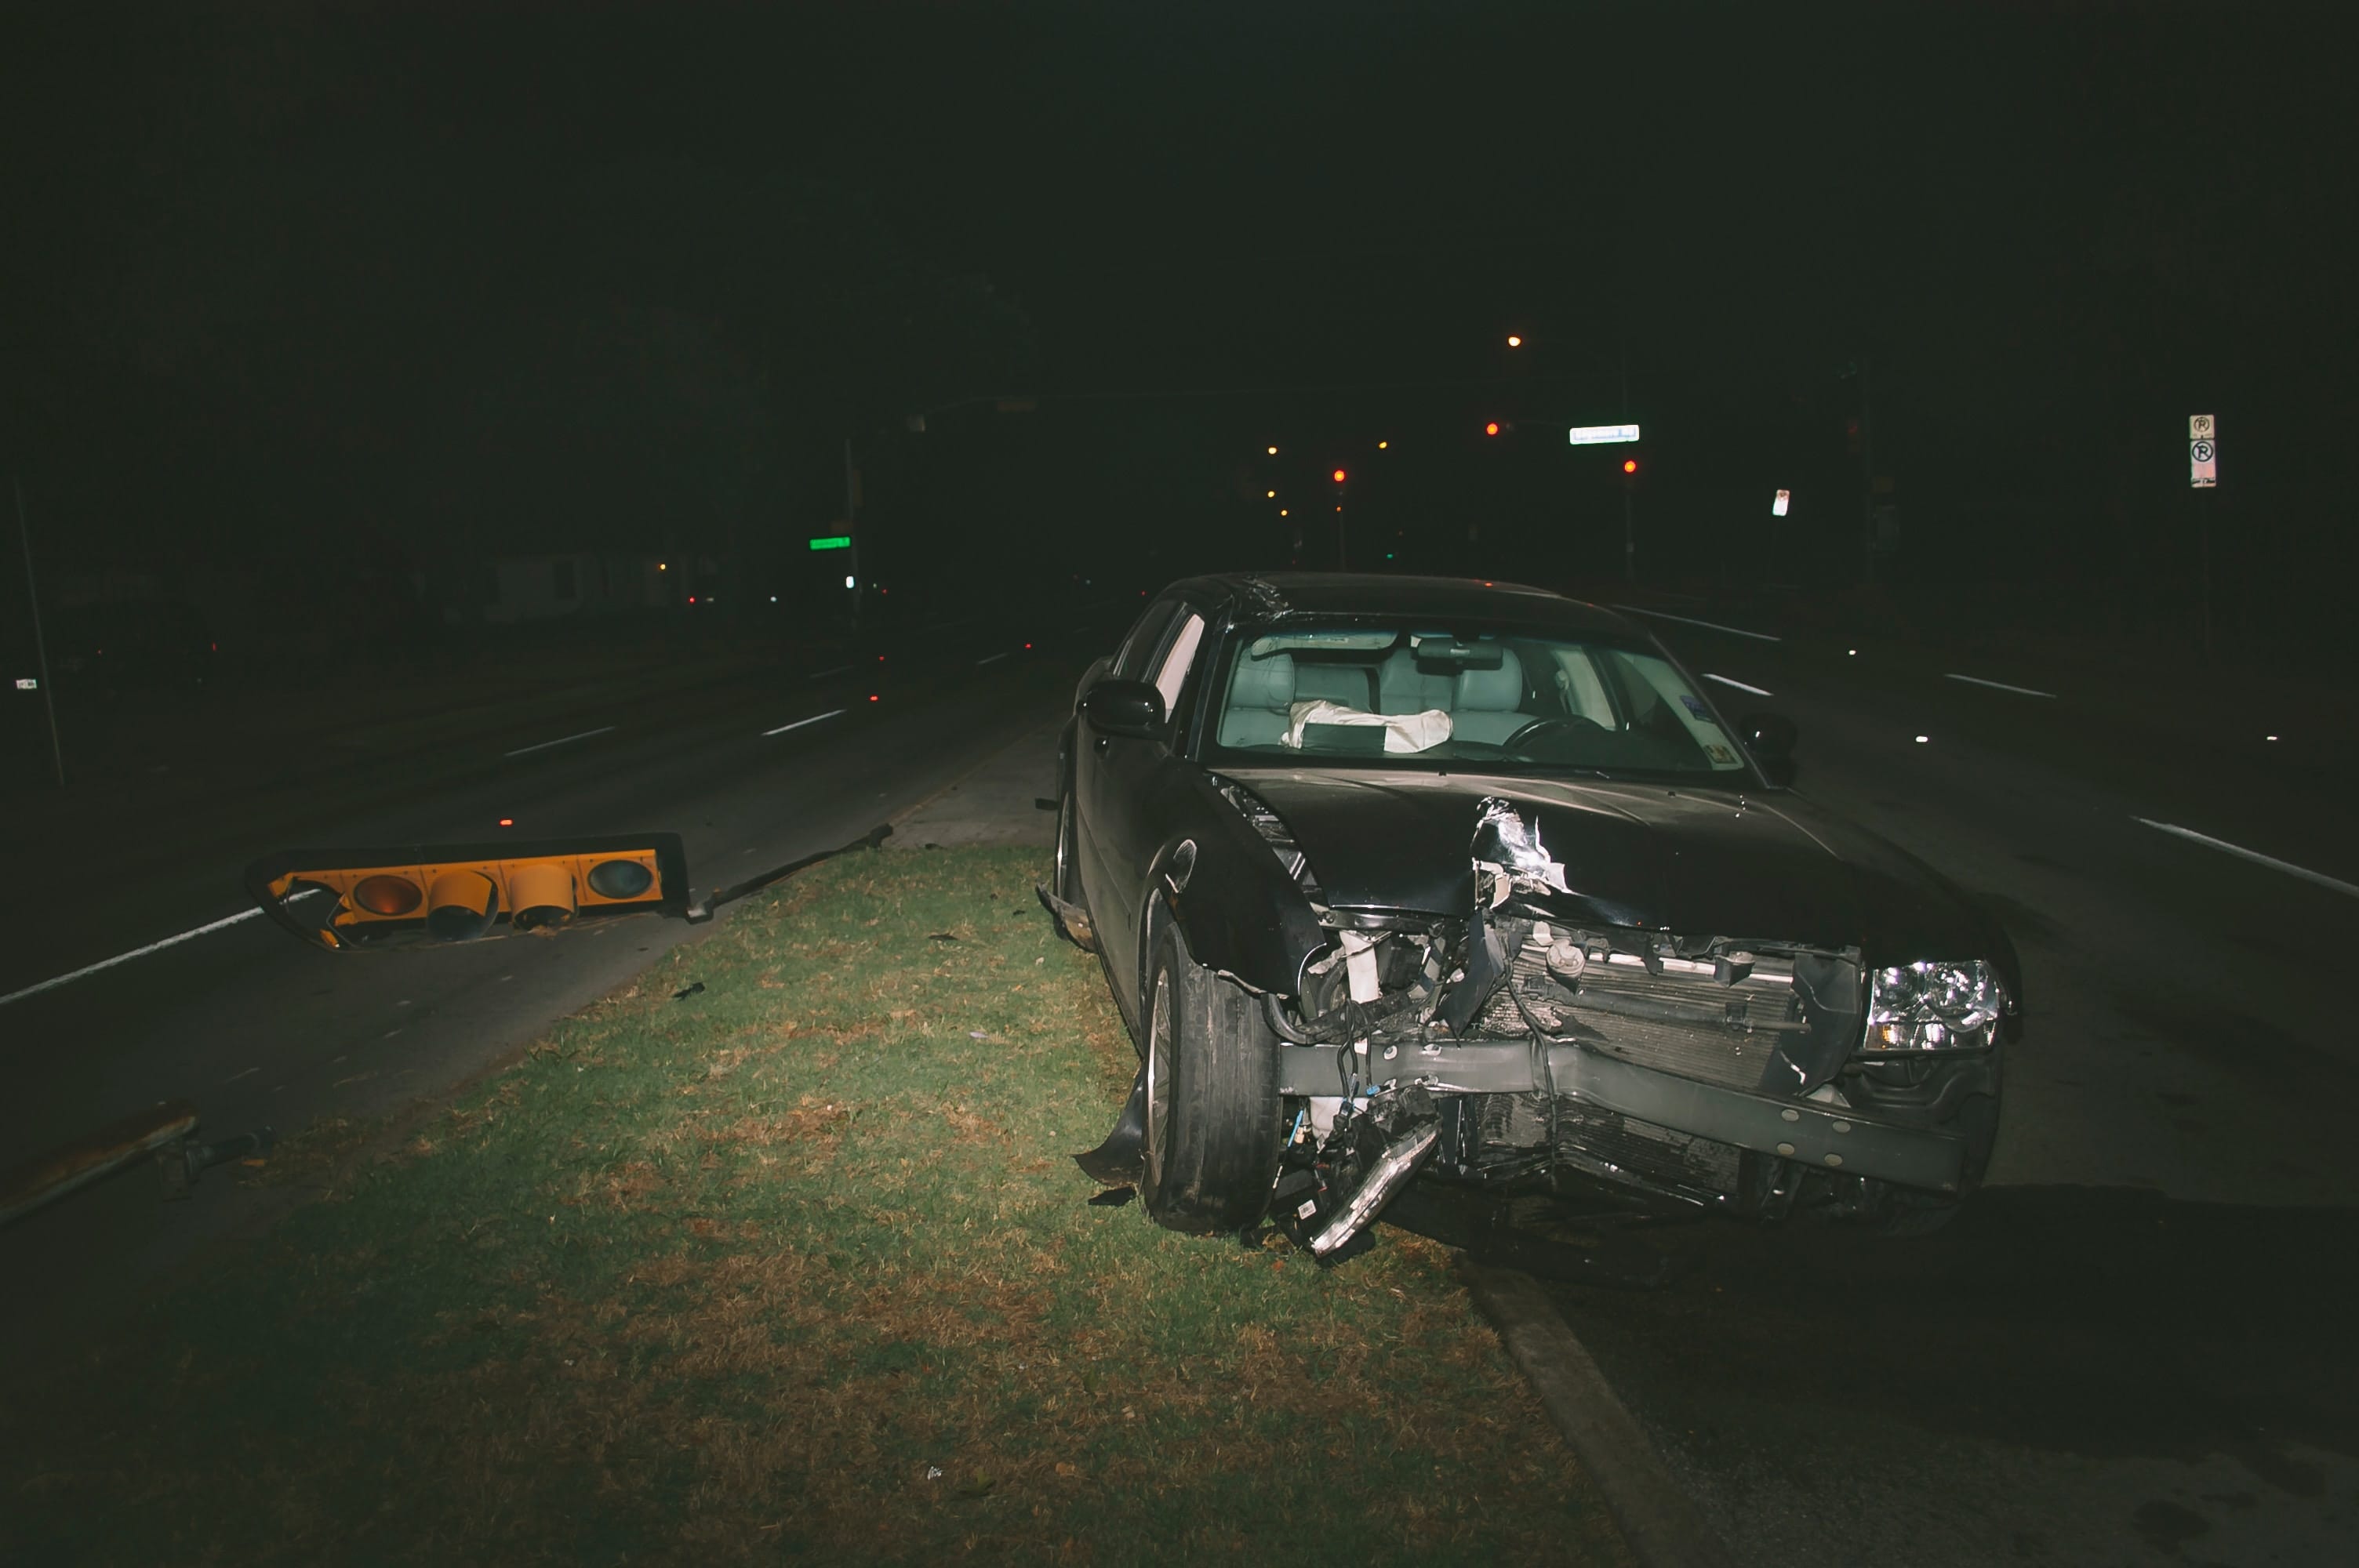 A car with serious front-end damage in the street at night next to a fallen traffic light; image by Matthew T. Rader, via Unsplash.com.